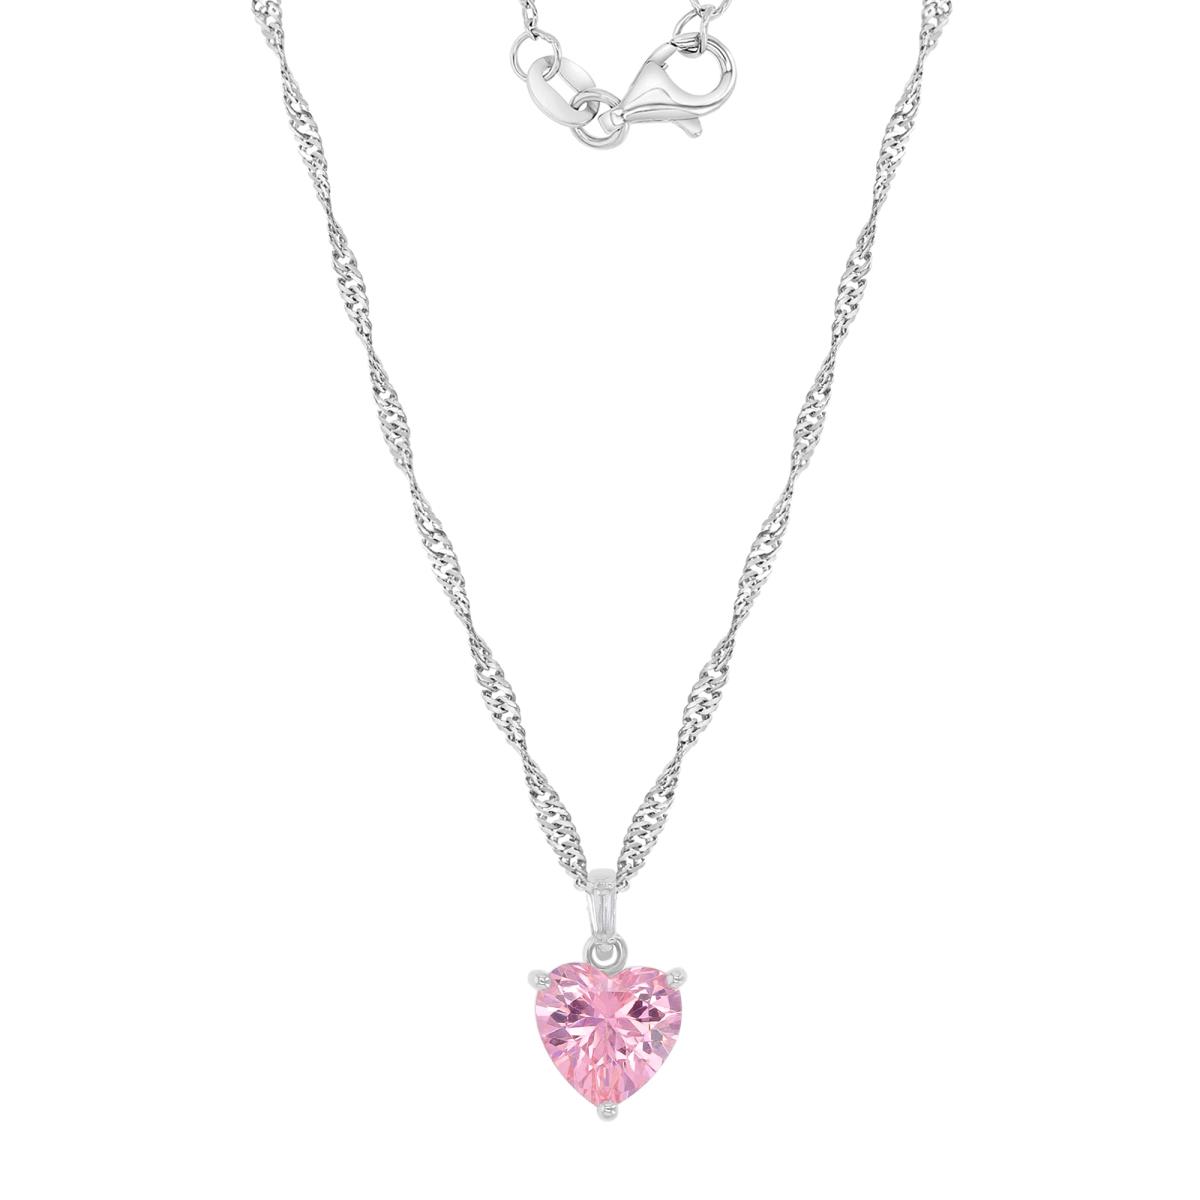 Sterling Silver Rhodium 8mm Heart Shape Pink CZ Dangling Singapore Chain 18+2" Necklace